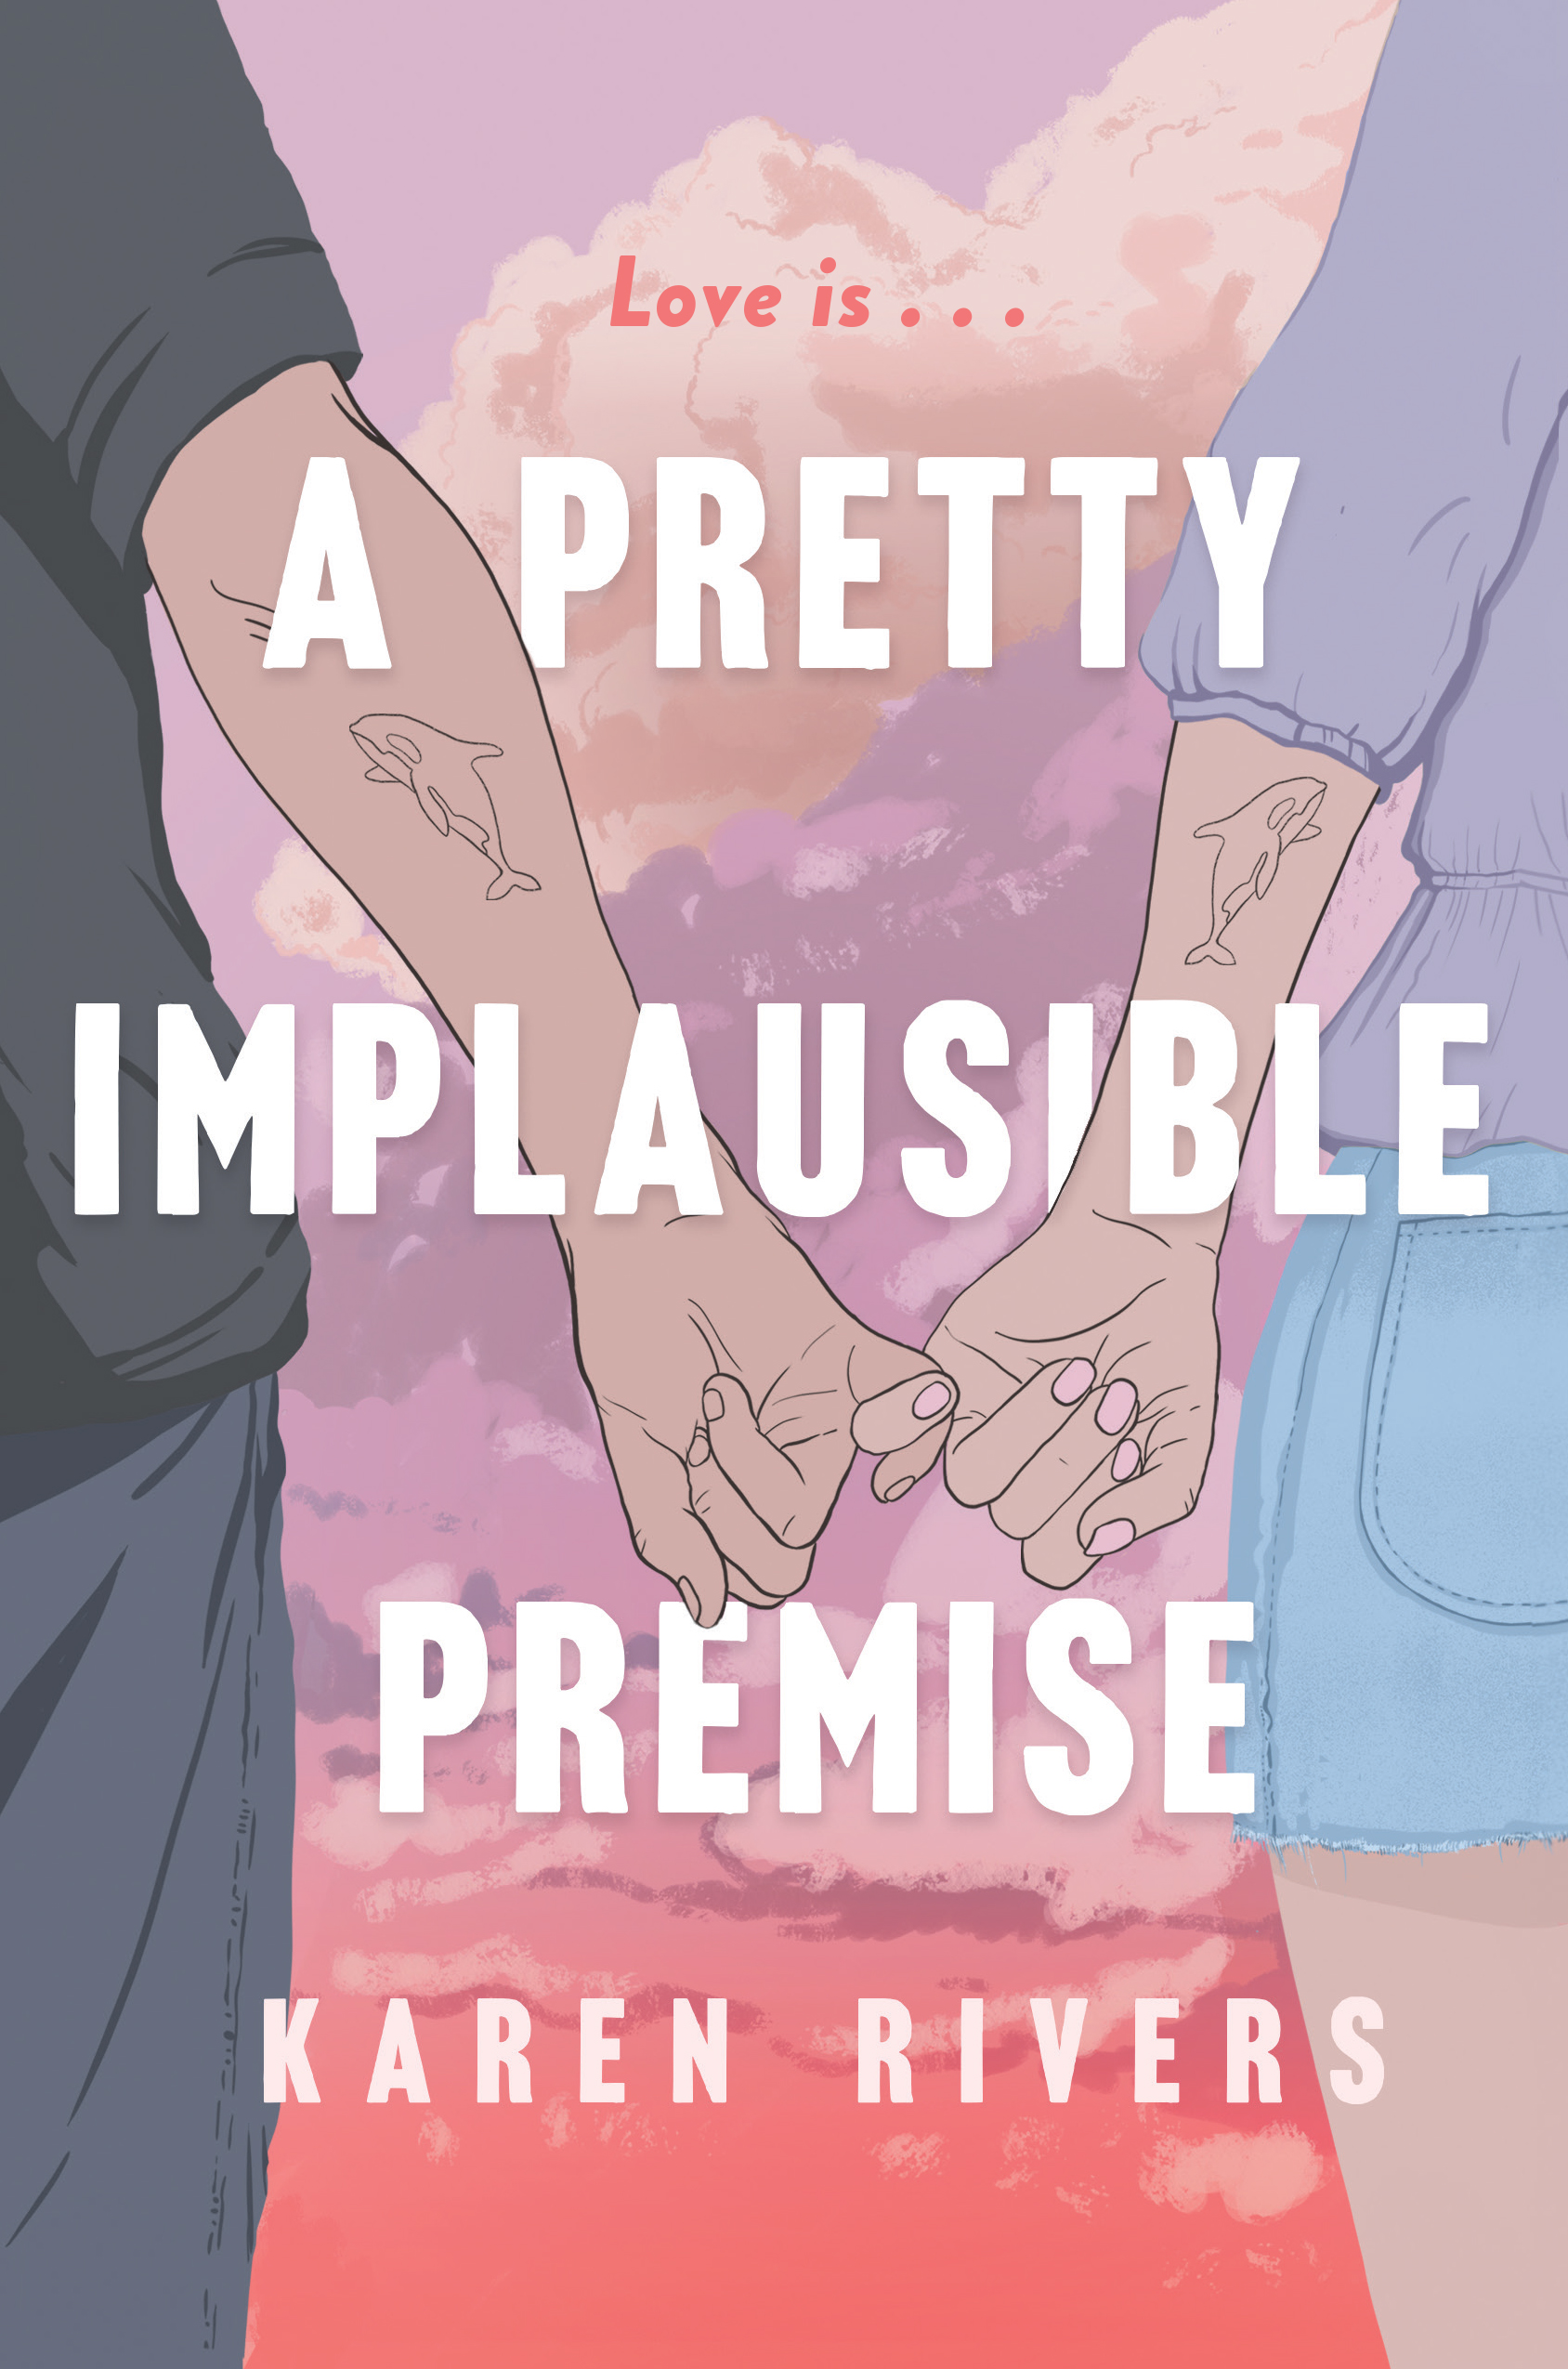 A Pretty Implausible Premise by Karen Rivers | Hachette Book Group